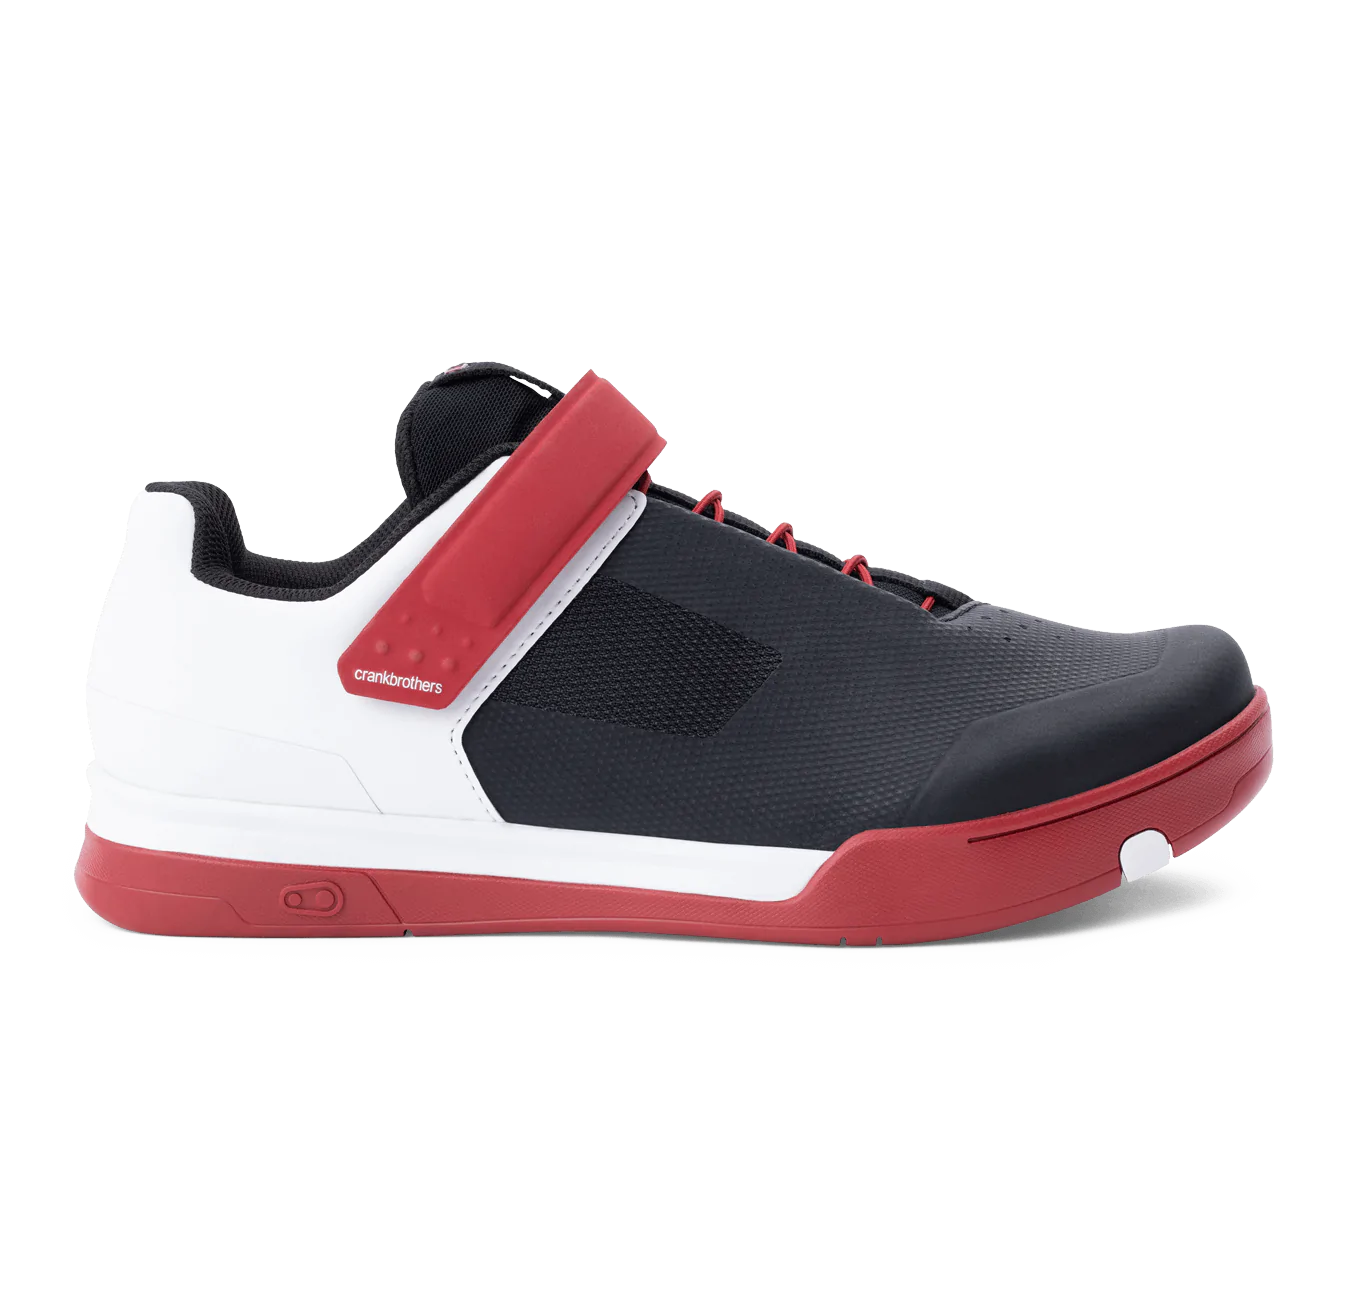 Crank Brothers Mallet Speedlace Red/Black/White-Red Zapatillas